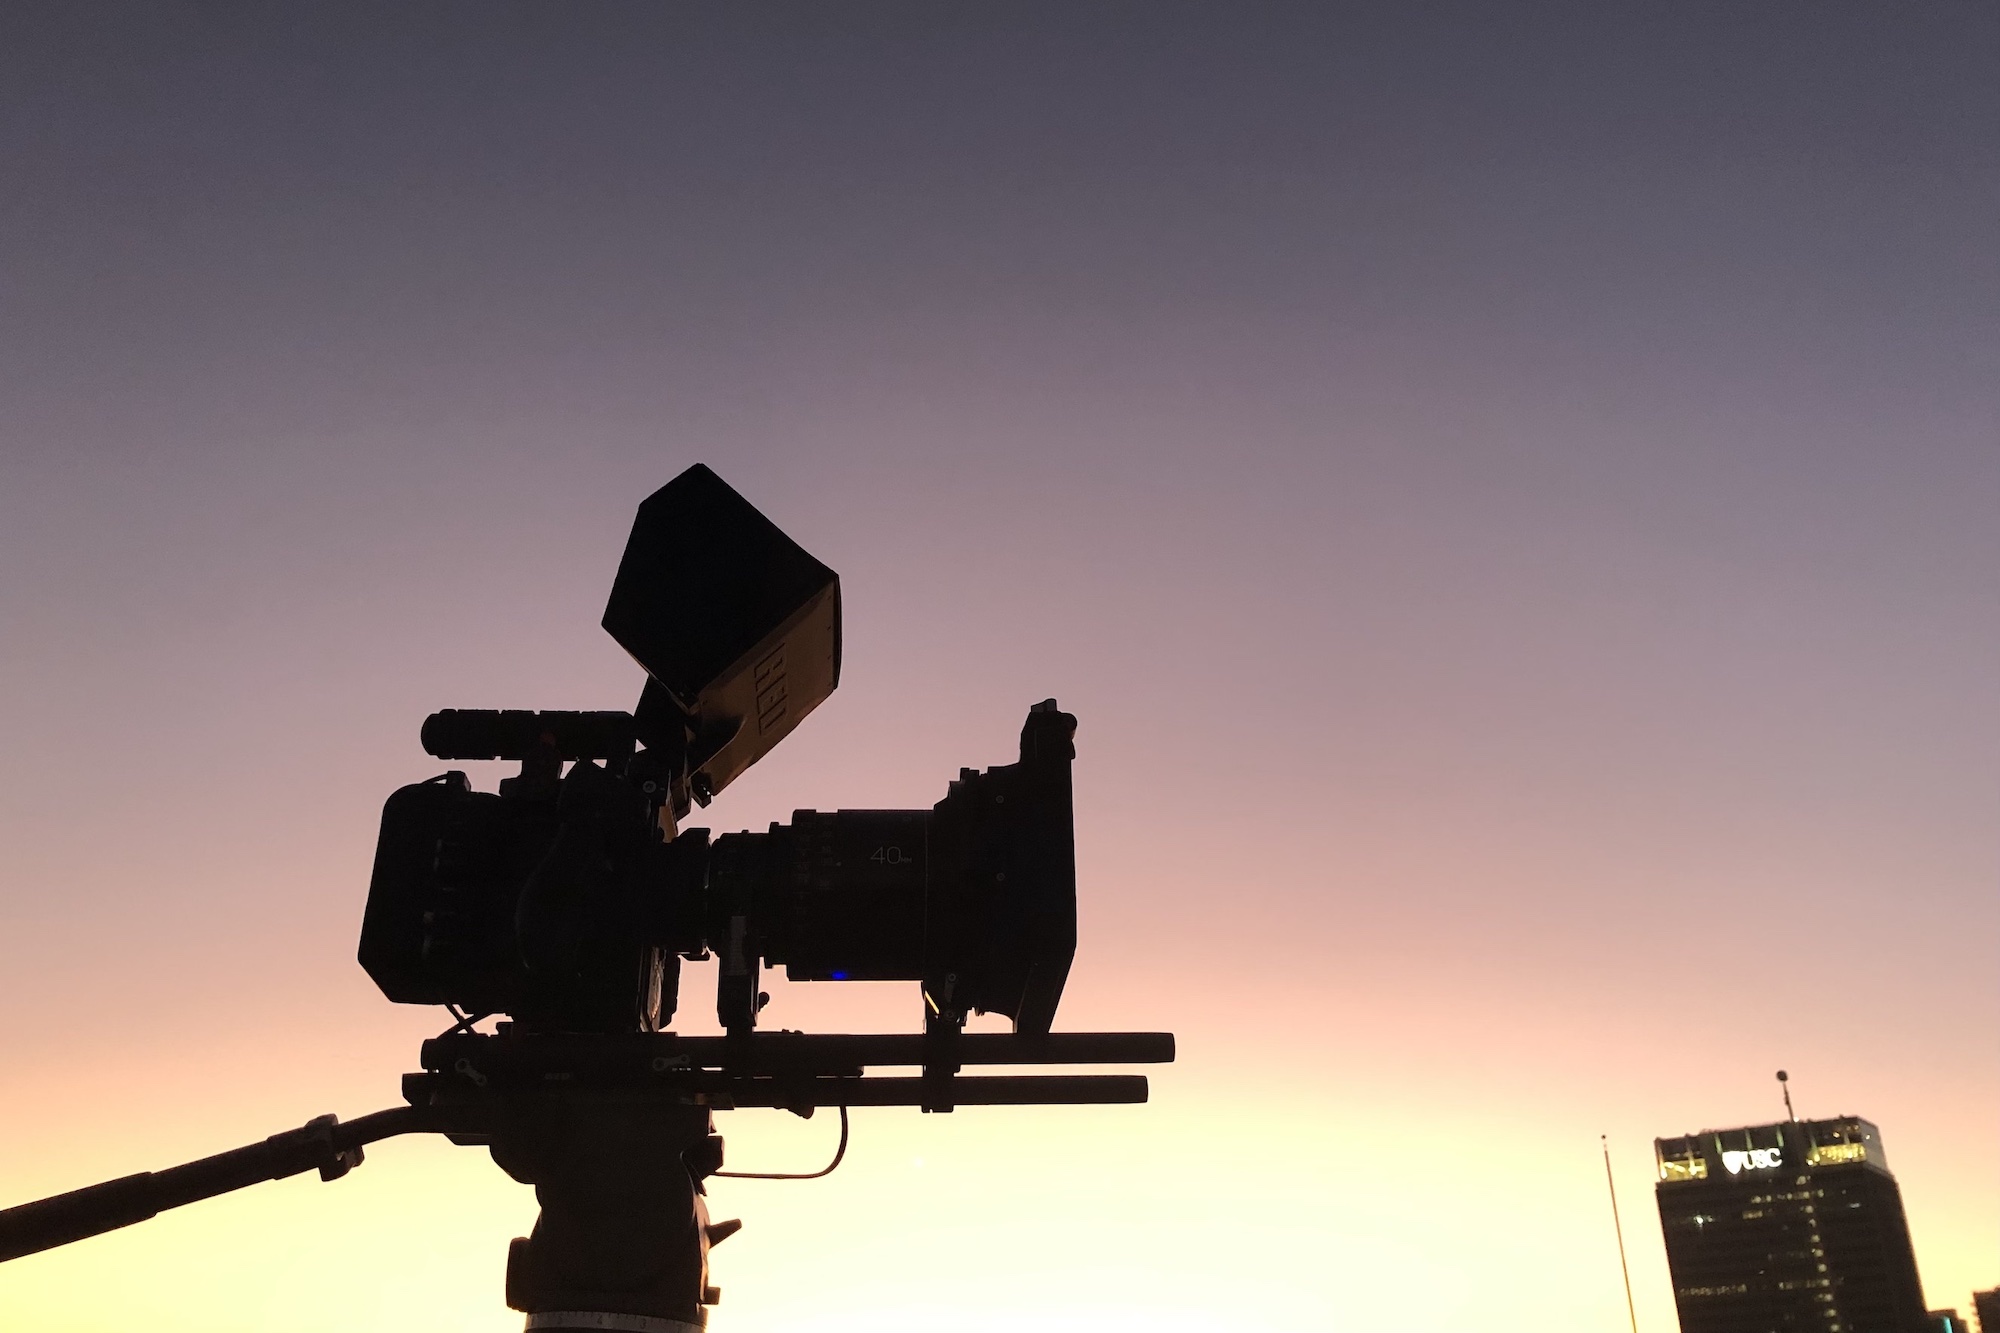 Black Violin BTS Side view showing silhouette of video camera at dusk with building in the background